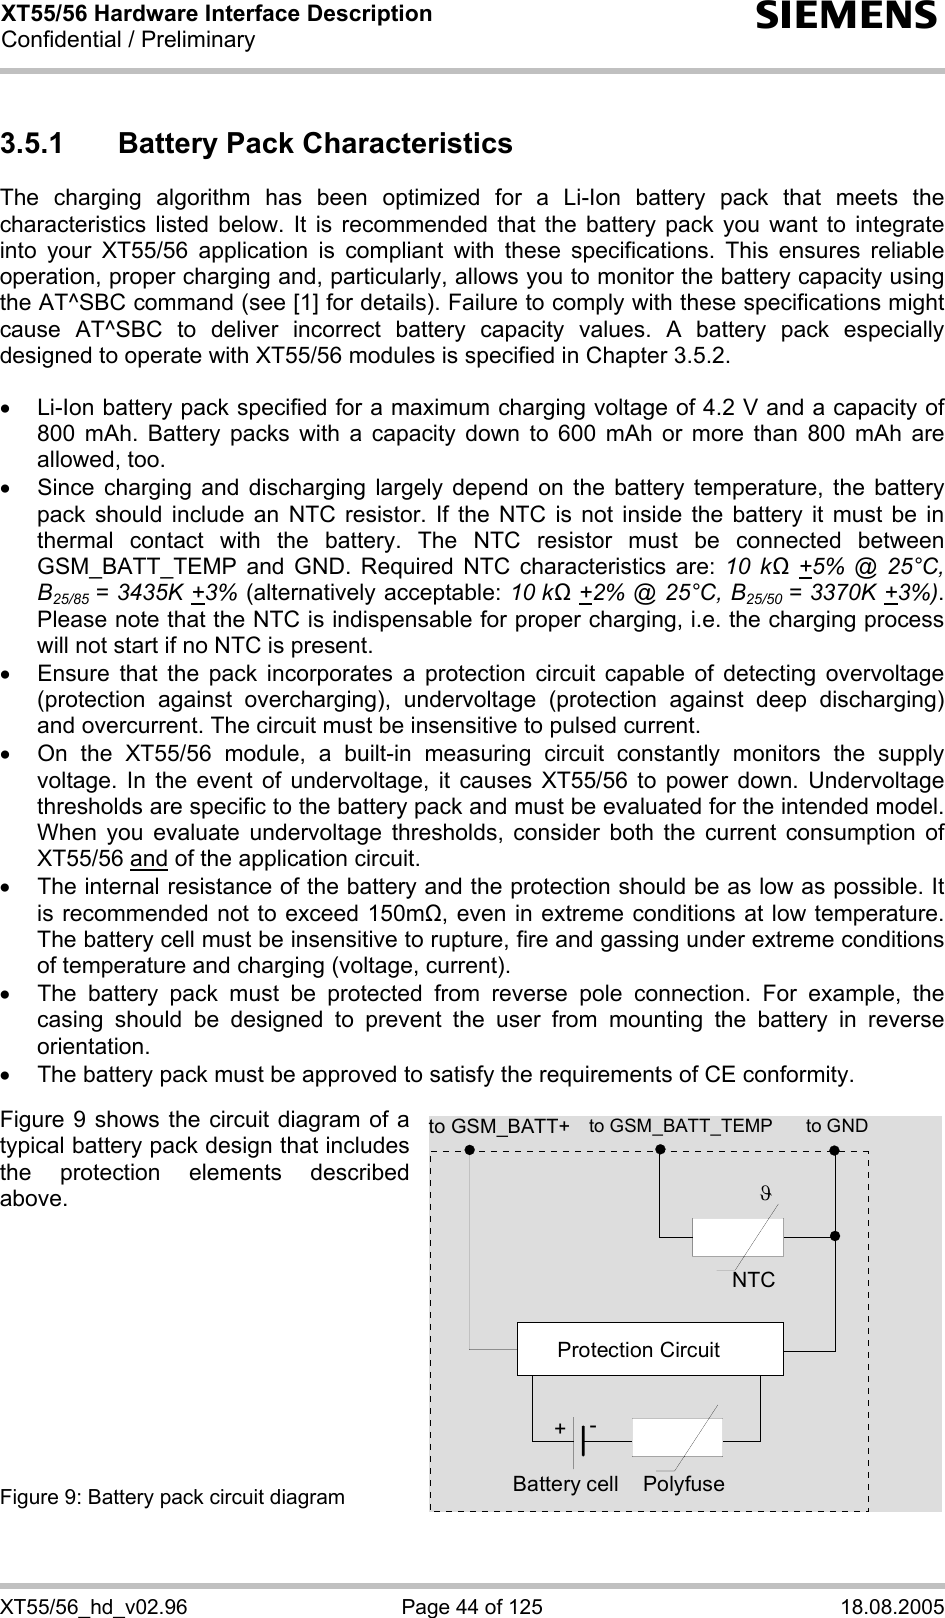 XT55/56 Hardware Interface Description Confidential / Preliminary s XT55/56_hd_v02.96  Page 44 of 125  18.08.2005 3.5.1  Battery Pack Characteristics The charging algorithm has been optimized for a Li-Ion battery pack that meets the characteristics listed below. It is recommended that the battery pack you want to integrate into your XT55/56 application is compliant with these specifications. This ensures reliable operation, proper charging and, particularly, allows you to monitor the battery capacity using the AT^SBC command (see [1] for details). Failure to comply with these specifications might cause AT^SBC to deliver incorrect battery capacity values. A battery pack especially designed to operate with XT55/56 modules is specified in Chapter 3.5.2.  •  Li-Ion battery pack specified for a maximum charging voltage of 4.2 V and a capacity of 800 mAh. Battery packs with a capacity down to 600 mAh or more than 800 mAh are allowed, too. •  Since charging and discharging largely depend on the battery temperature, the battery pack should include an NTC resistor. If the NTC is not inside the battery it must be in thermal contact with the battery. The NTC resistor must be connected between GSM_BATT_TEMP and GND. Required NTC characteristics are: 10 kΩ +5% @ 25°C, B25/85  = 3435K +3% (alternatively acceptable: 10 kΩ +2% @ 25°C, B25/50  = 3370K +3%). Please note that the NTC is indispensable for proper charging, i.e. the charging process will not start if no NTC is present. •  Ensure that the pack incorporates a protection circuit capable of detecting overvoltage (protection against overcharging), undervoltage (protection against deep discharging) and overcurrent. The circuit must be insensitive to pulsed current. •  On the XT55/56 module, a built-in measuring circuit constantly monitors the supply voltage. In the event of undervoltage, it causes XT55/56 to power down. Undervoltage thresholds are specific to the battery pack and must be evaluated for the intended model. When you evaluate undervoltage thresholds, consider both the current consumption of XT55/56 and of the application circuit.  •  The internal resistance of the battery and the protection should be as low as possible. It is recommended not to exceed 150m, even in extreme conditions at low temperature. The battery cell must be insensitive to rupture, fire and gassing under extreme conditions of temperature and charging (voltage, current). •  The battery pack must be protected from reverse pole connection. For example, the casing should be designed to prevent the user from mounting the battery in reverse orientation. •  The battery pack must be approved to satisfy the requirements of CE conformity.  Figure 9 shows the circuit diagram of a typical battery pack design that includes the protection elements described above.           Figure 9: Battery pack circuit diagram  to GSM_BATT_TEMP to GNDNTCPolyfuseϑProtection Circuit+-Battery cellto GSM_BATT+